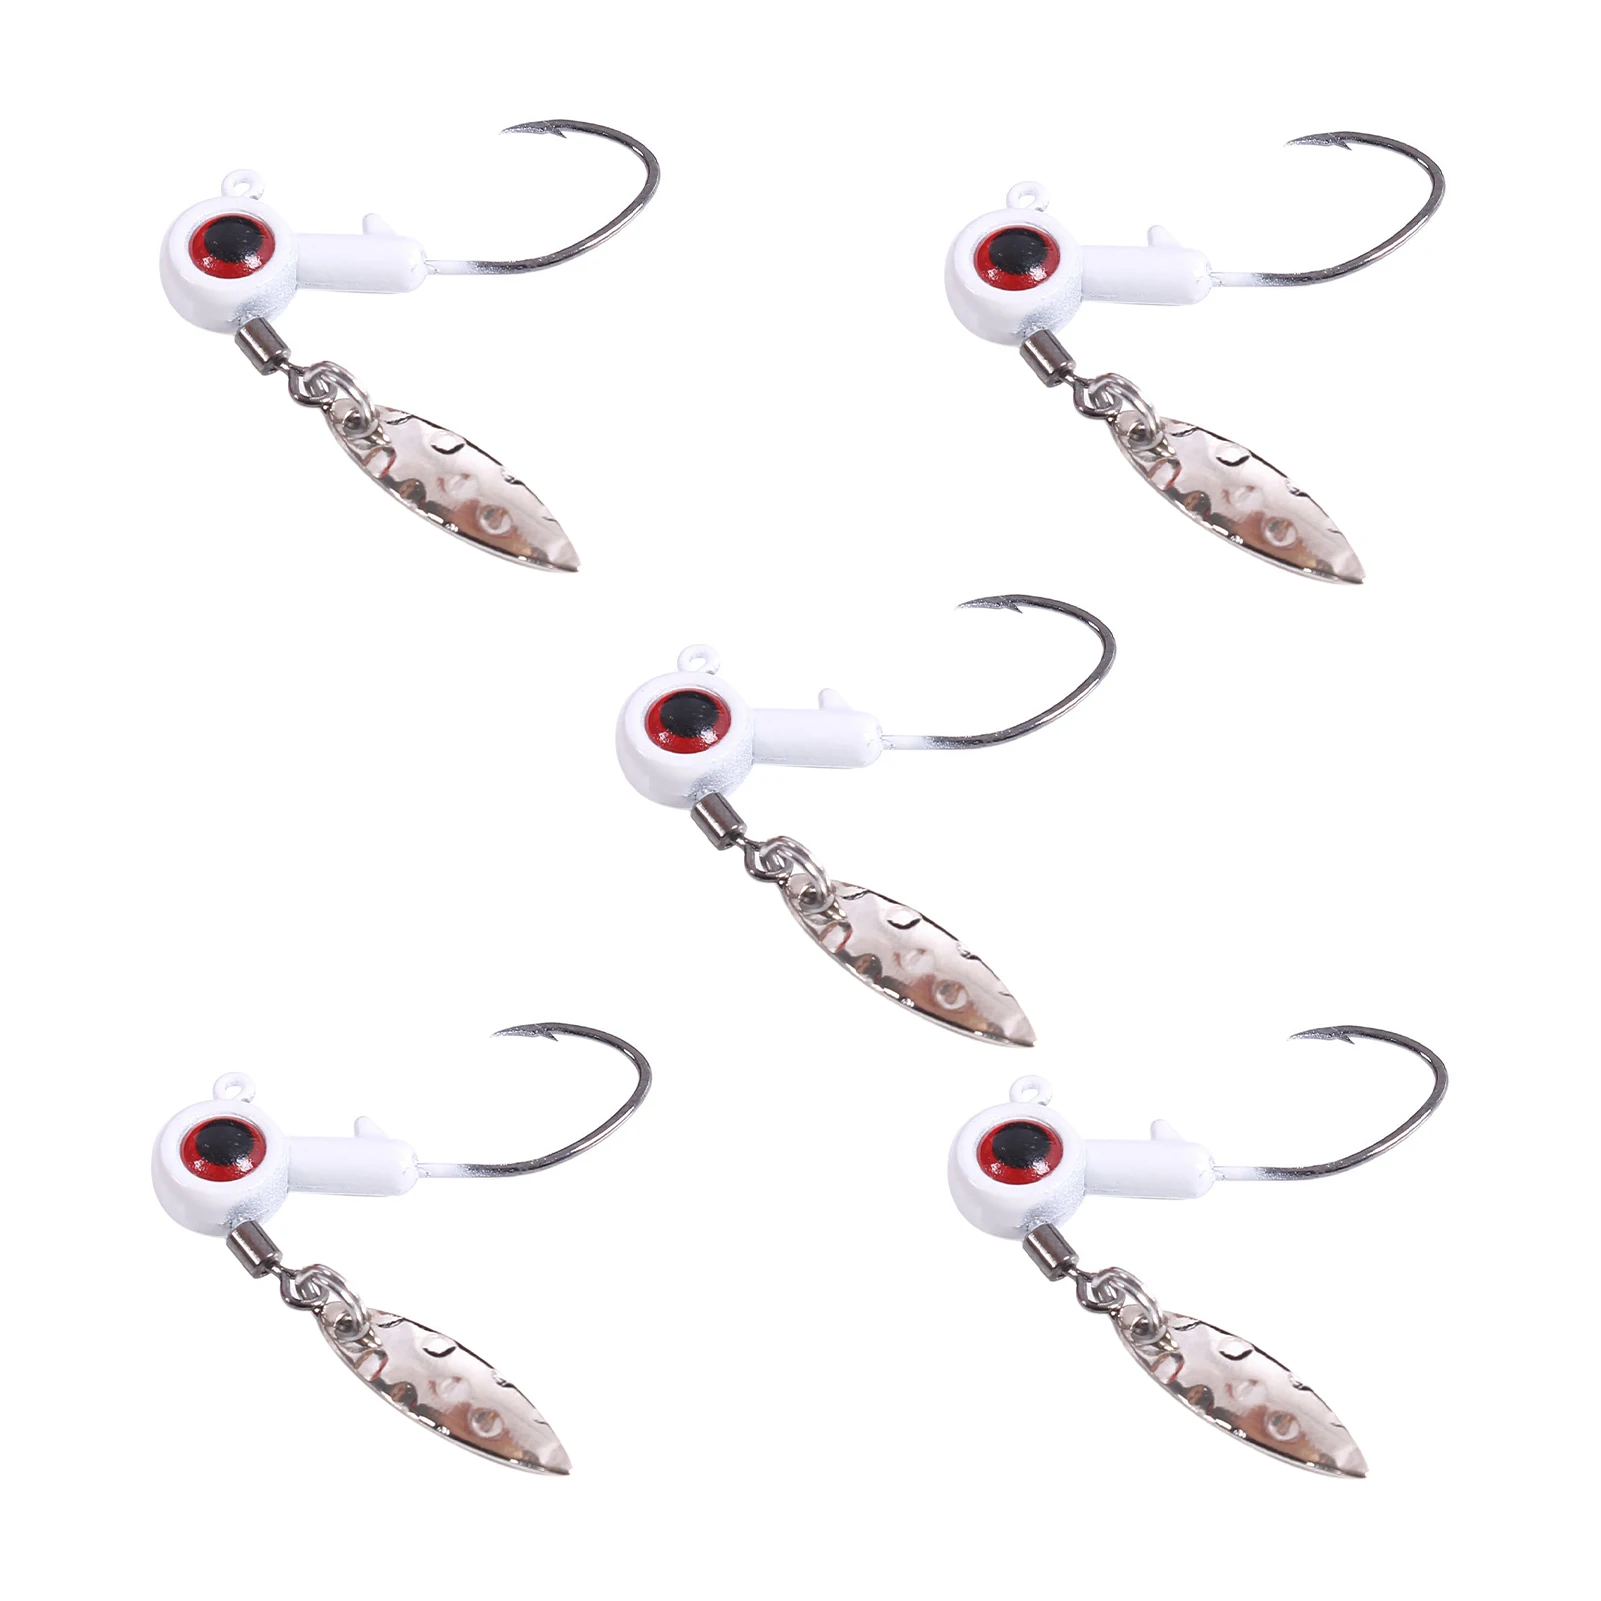 

5pcs Rotating Sequins Soft Bait Durable Tackle Fishing Hook Spinner Metal For Saltwater Freshwater Crank Jig Head Accessories